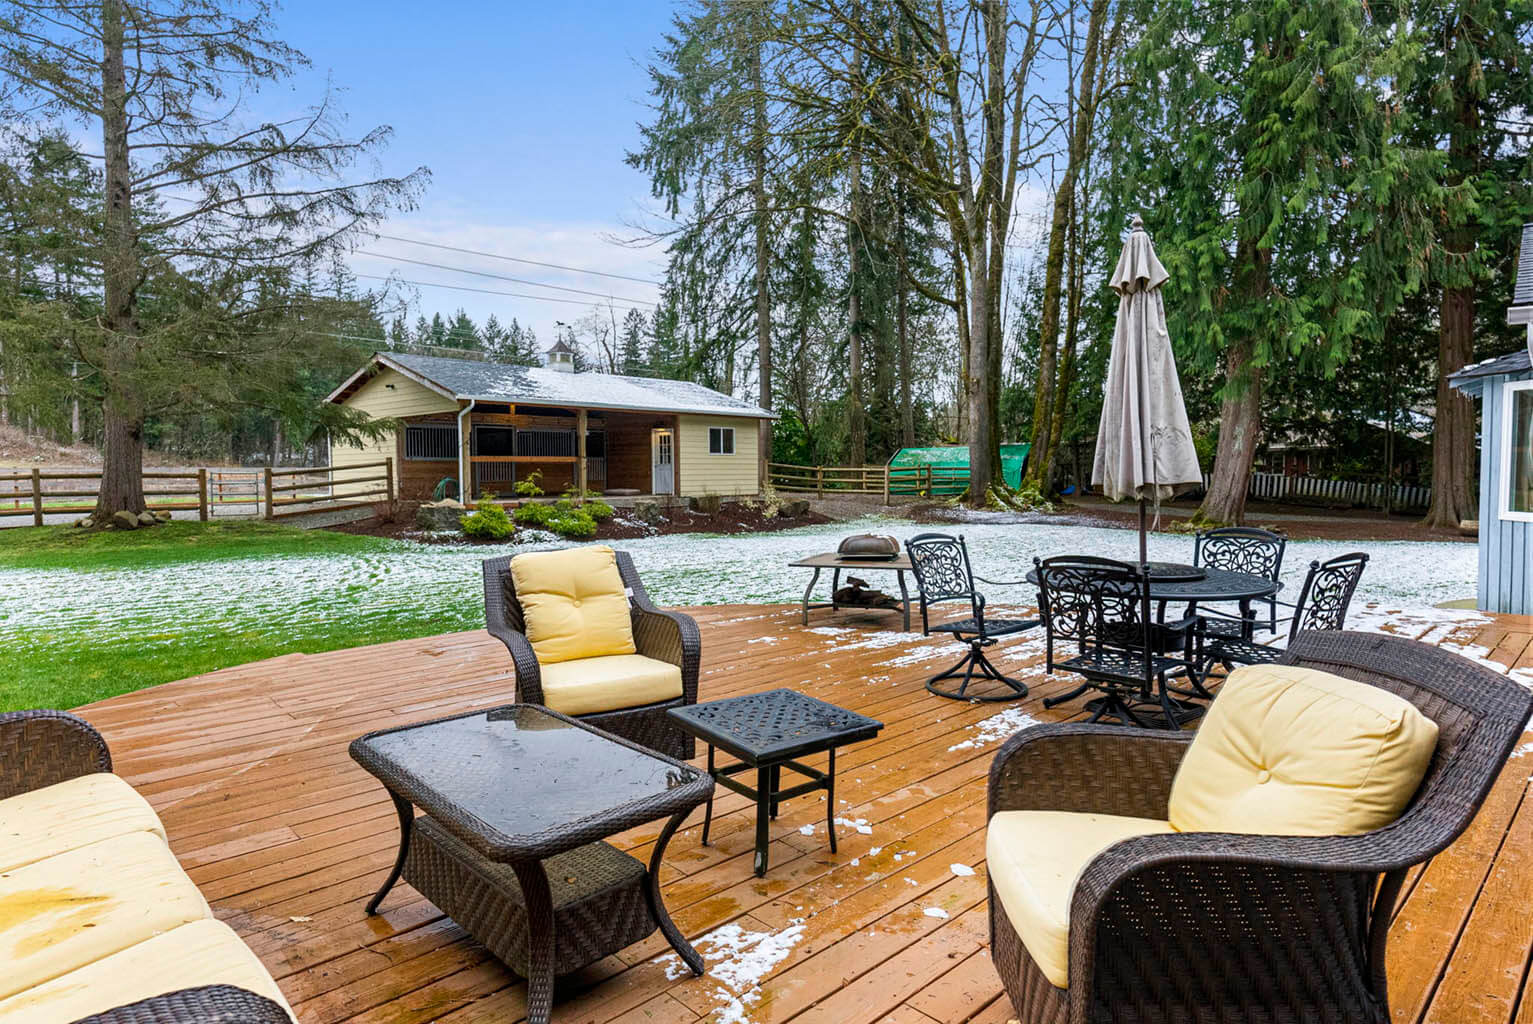 Large back deck is perfect for entertaining